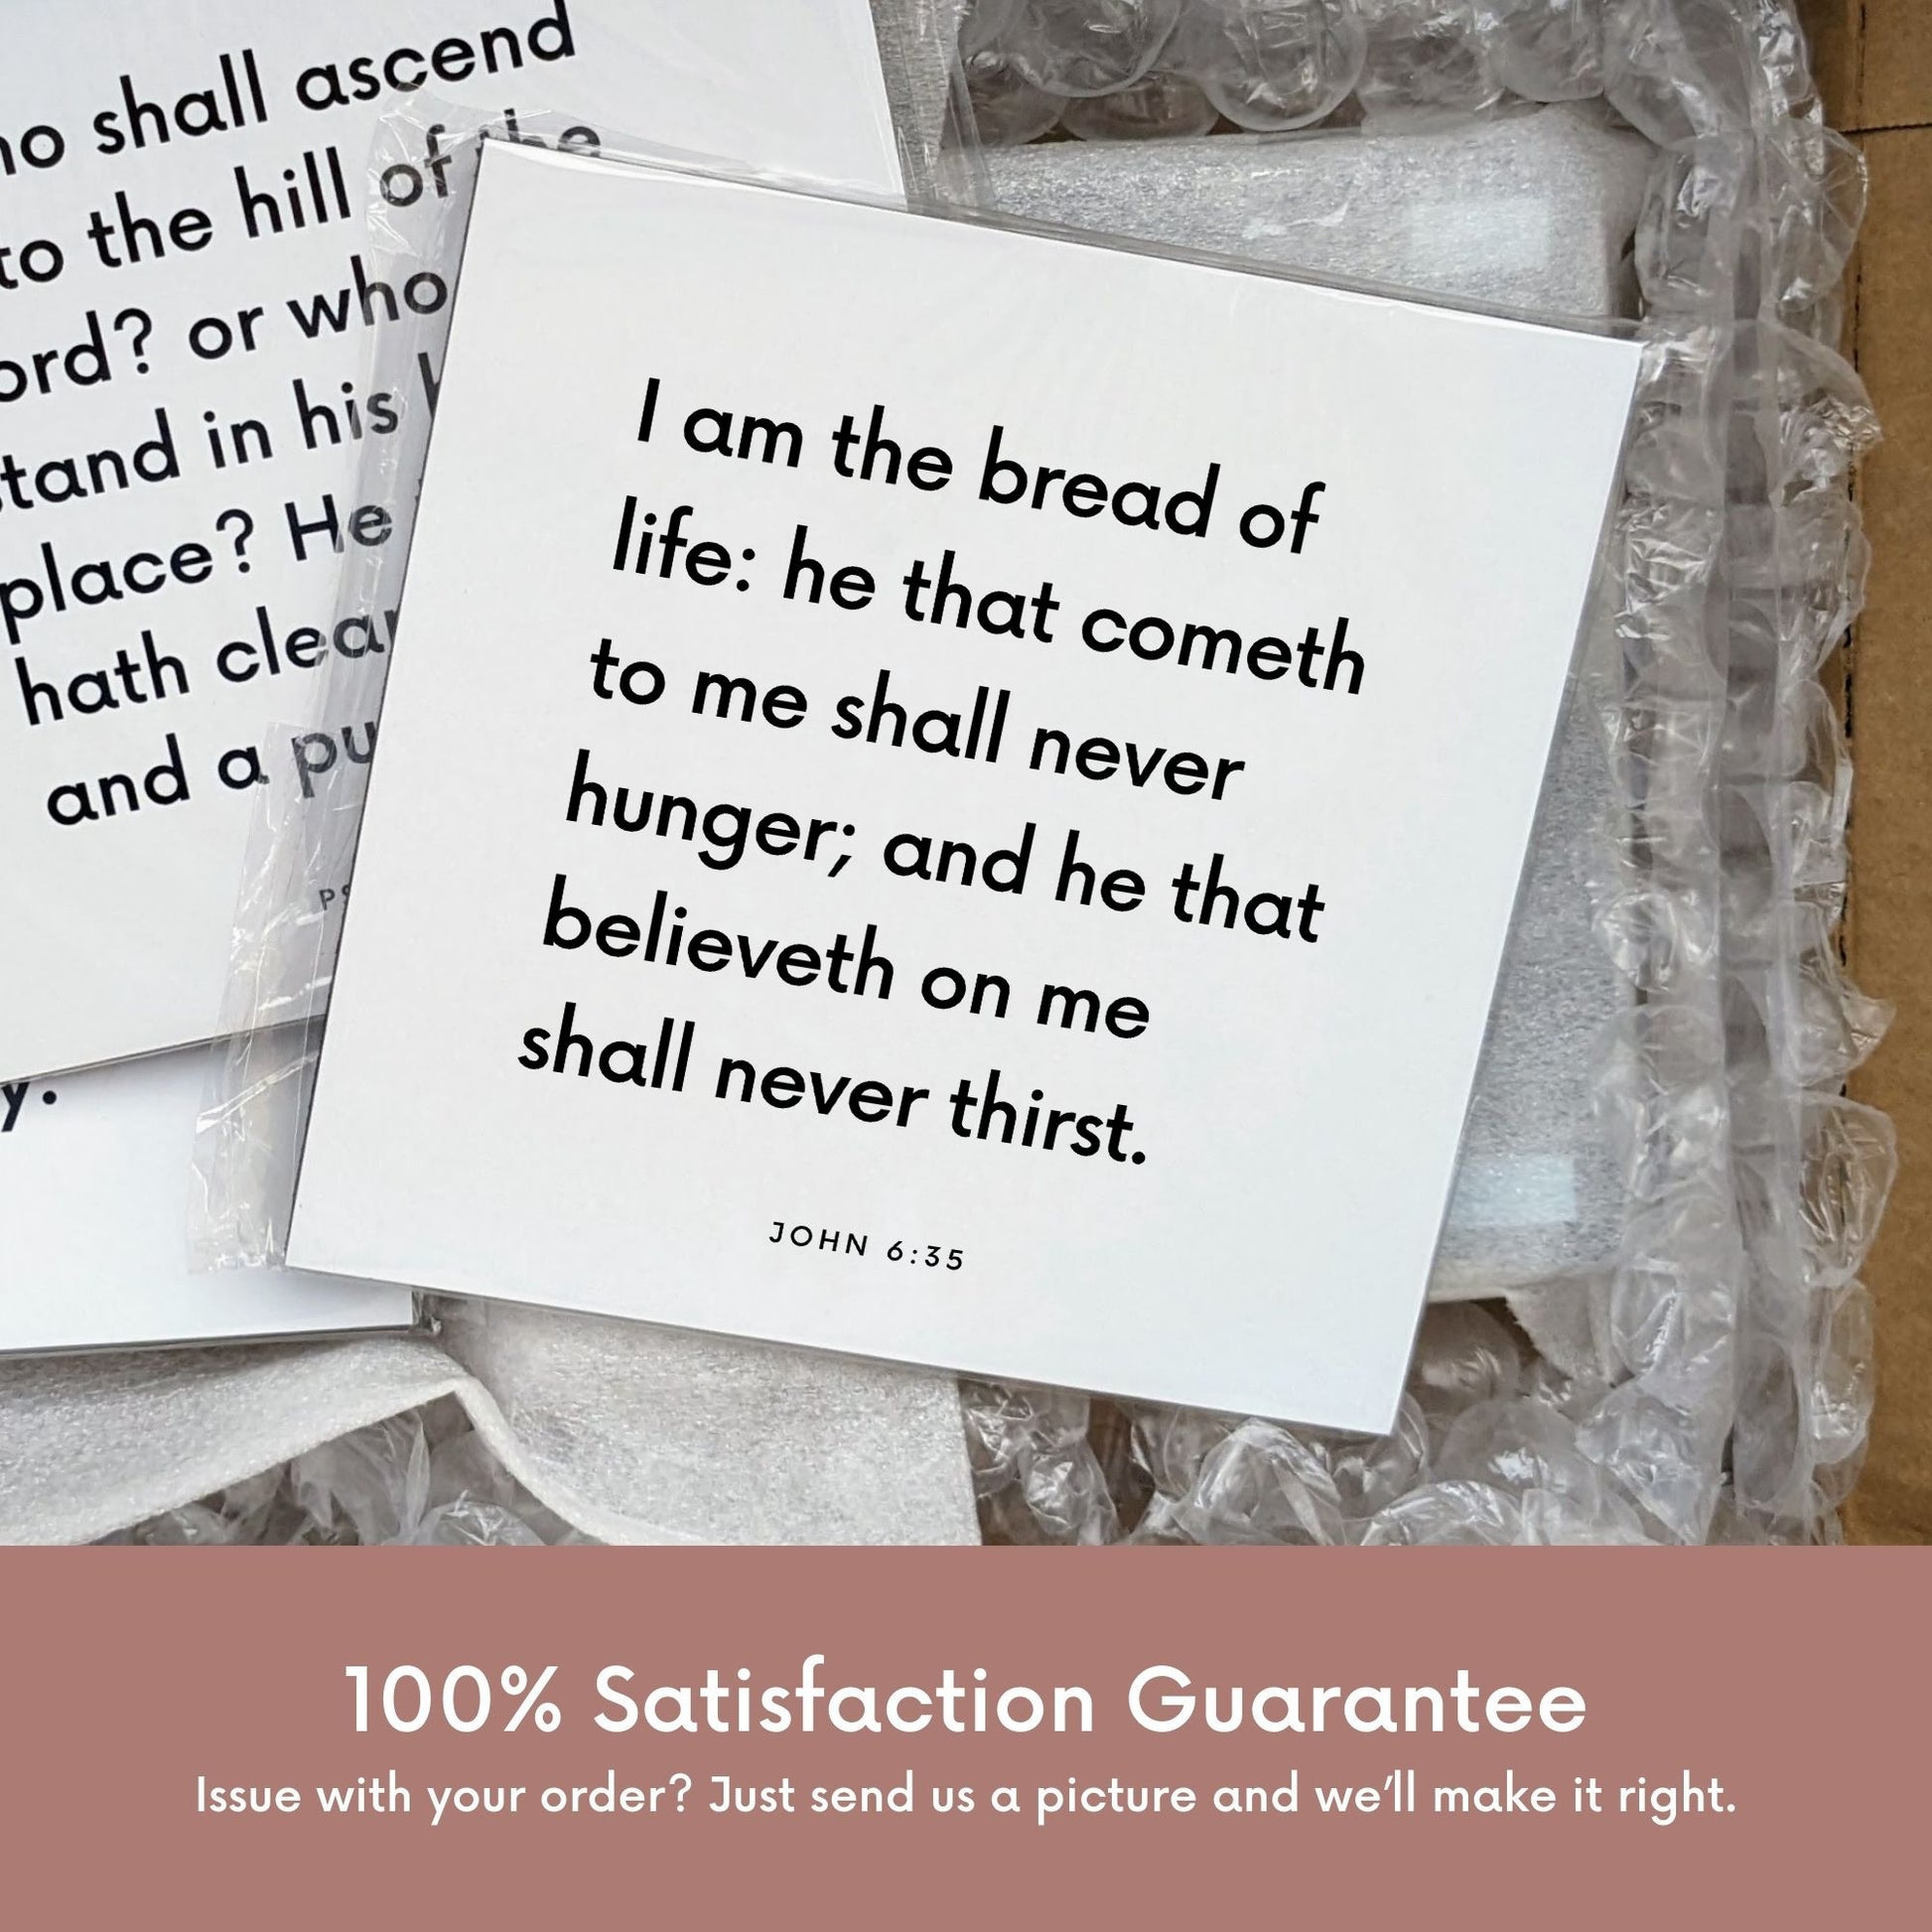 Shipping materials for scripture tile of John 6:35 - "I am the bread of life"